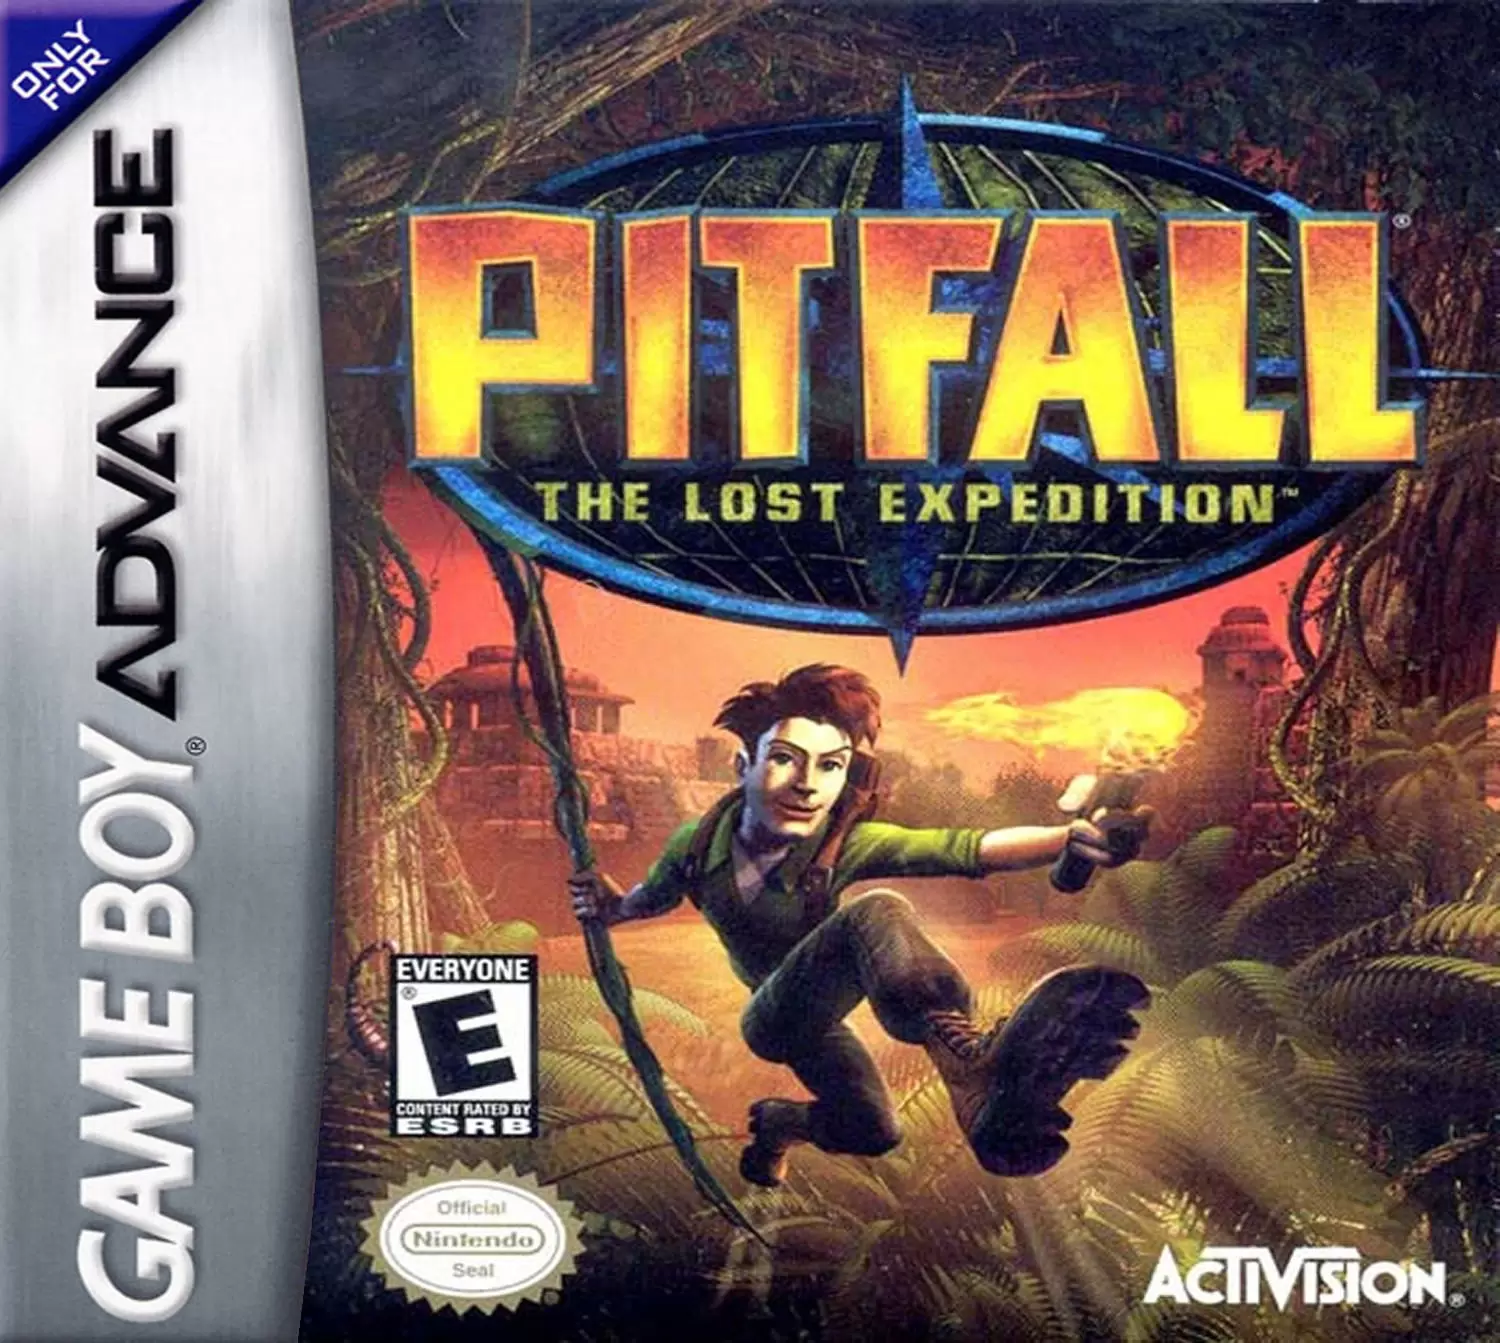 Jeux Game Boy Advance - Pitfall: The Lost Expedition